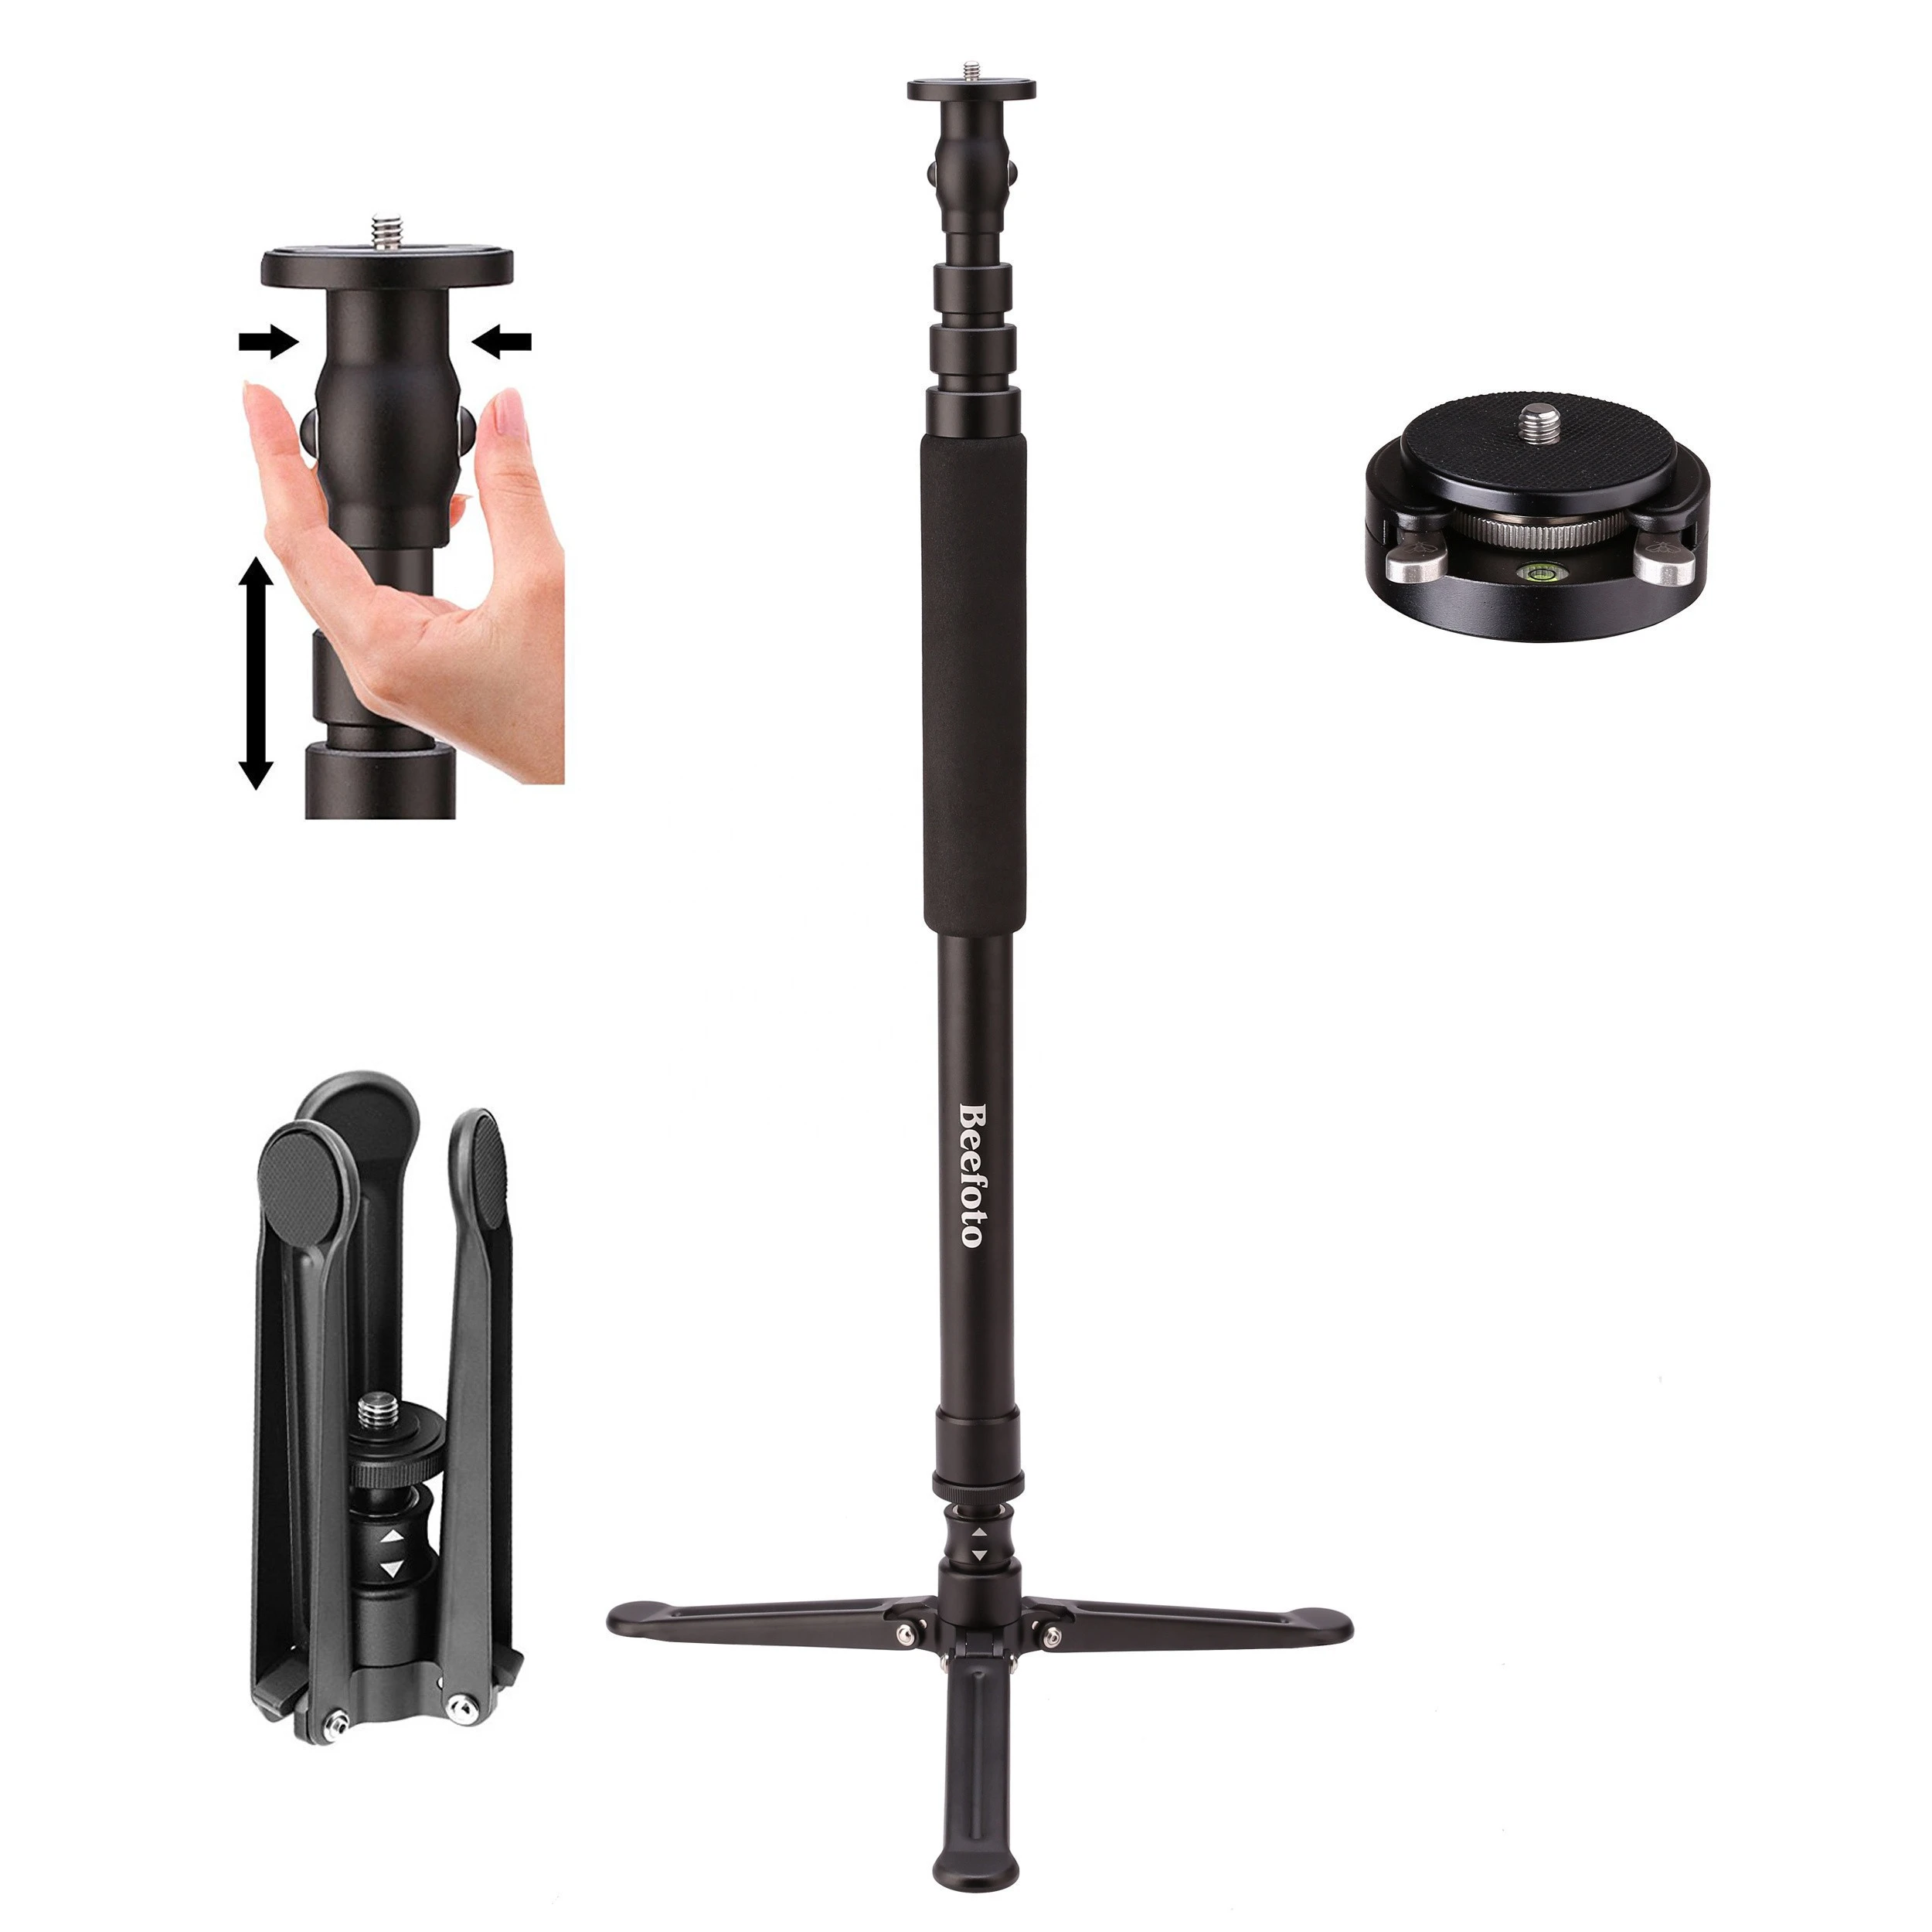 Beefoto Advanced Special Lock System Aluminum camera Monopod for video camera with base and quick release